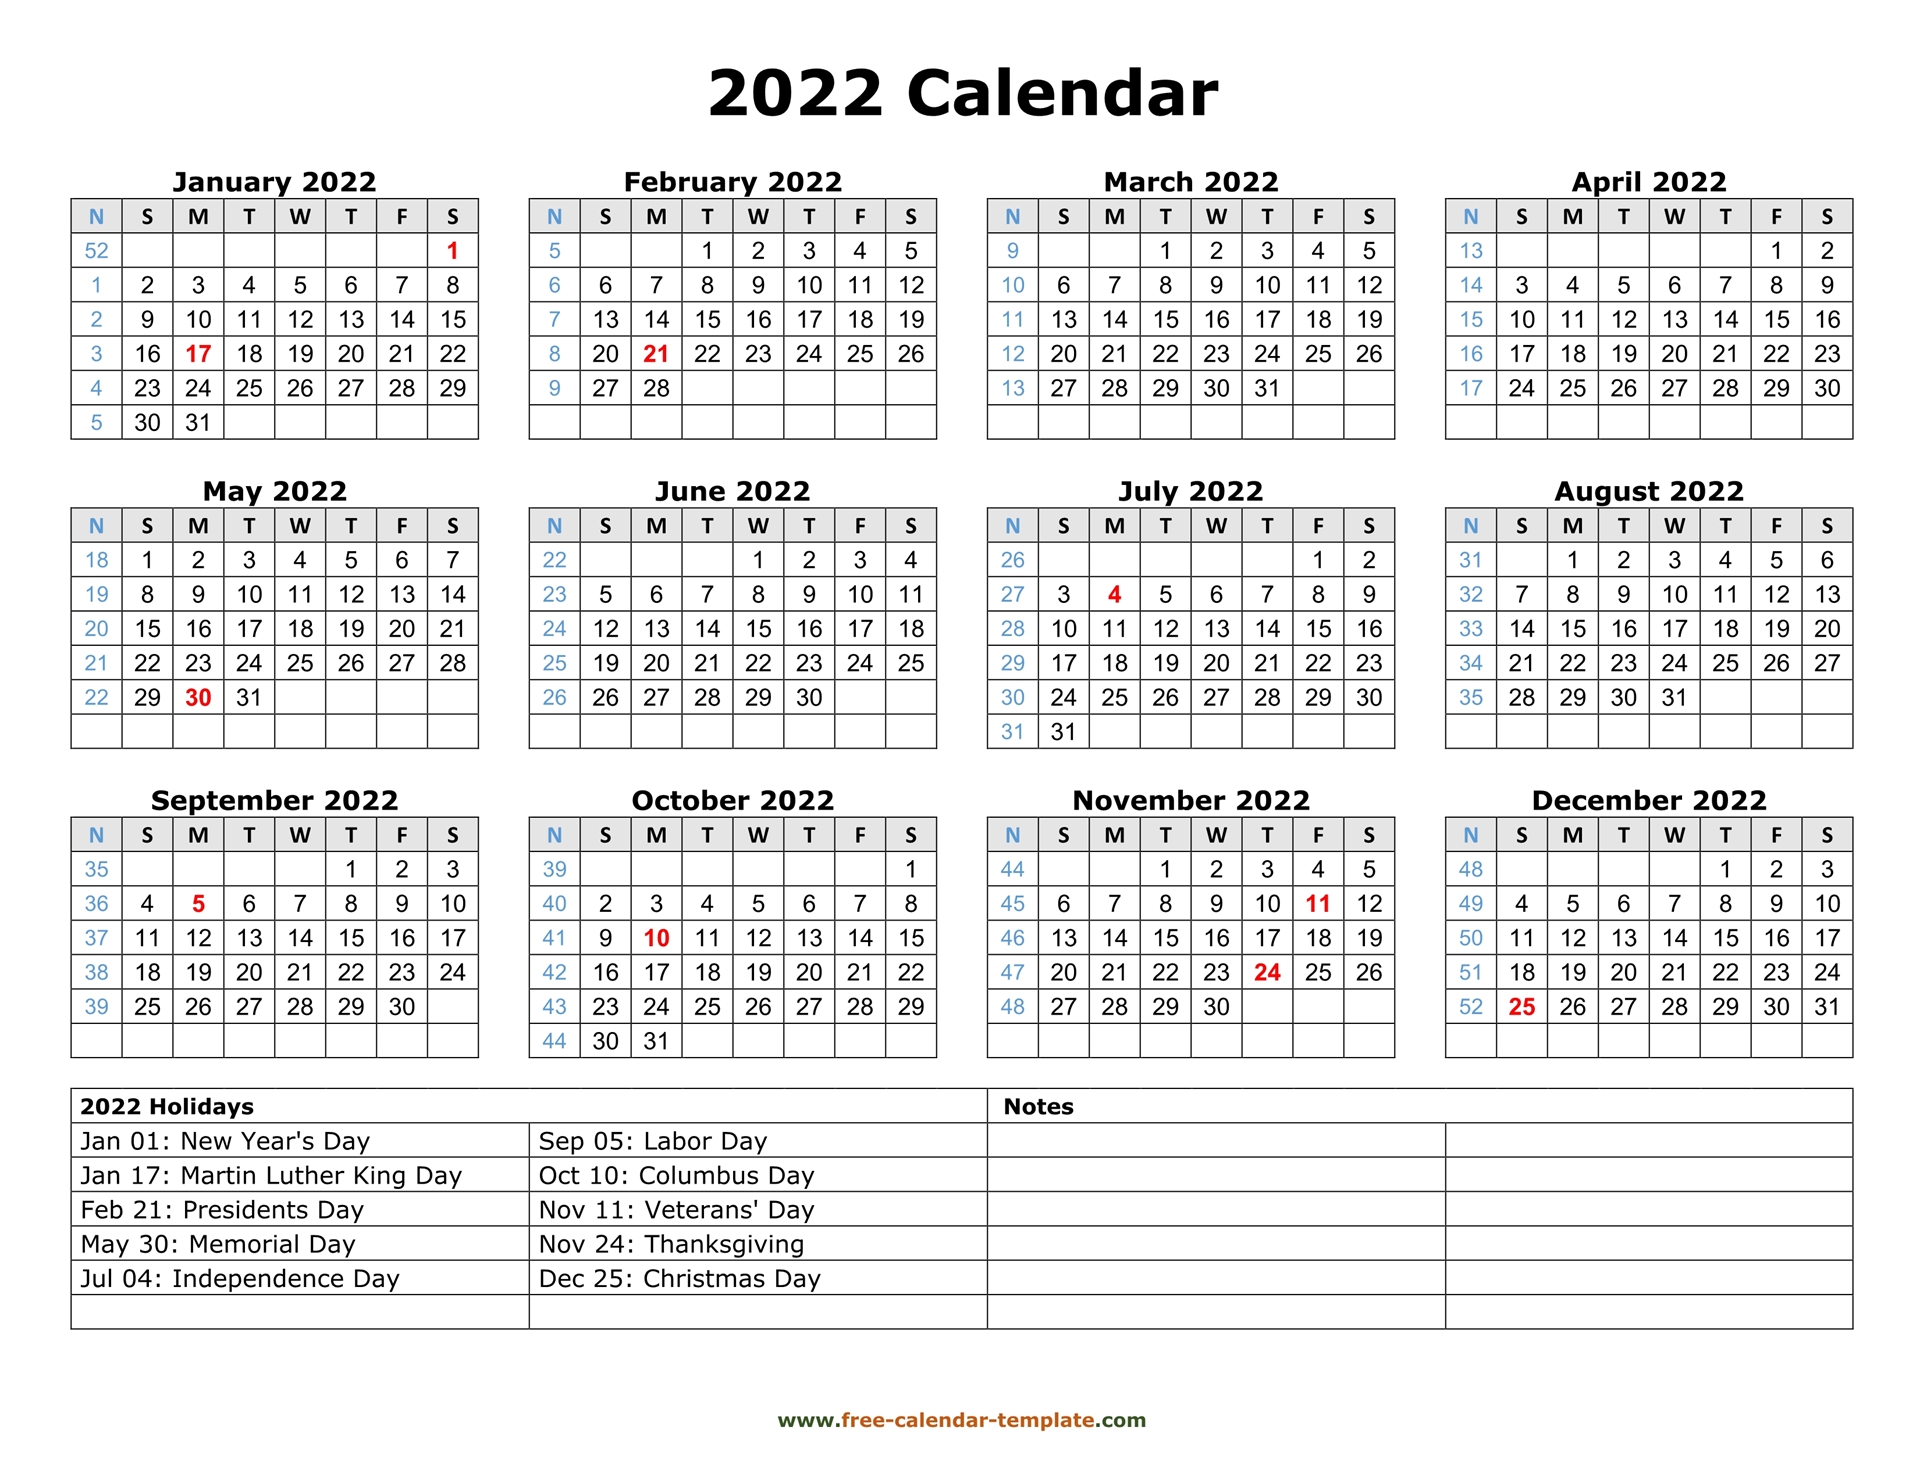 Printable yearly calendar 2022 with US holidays | Free ...